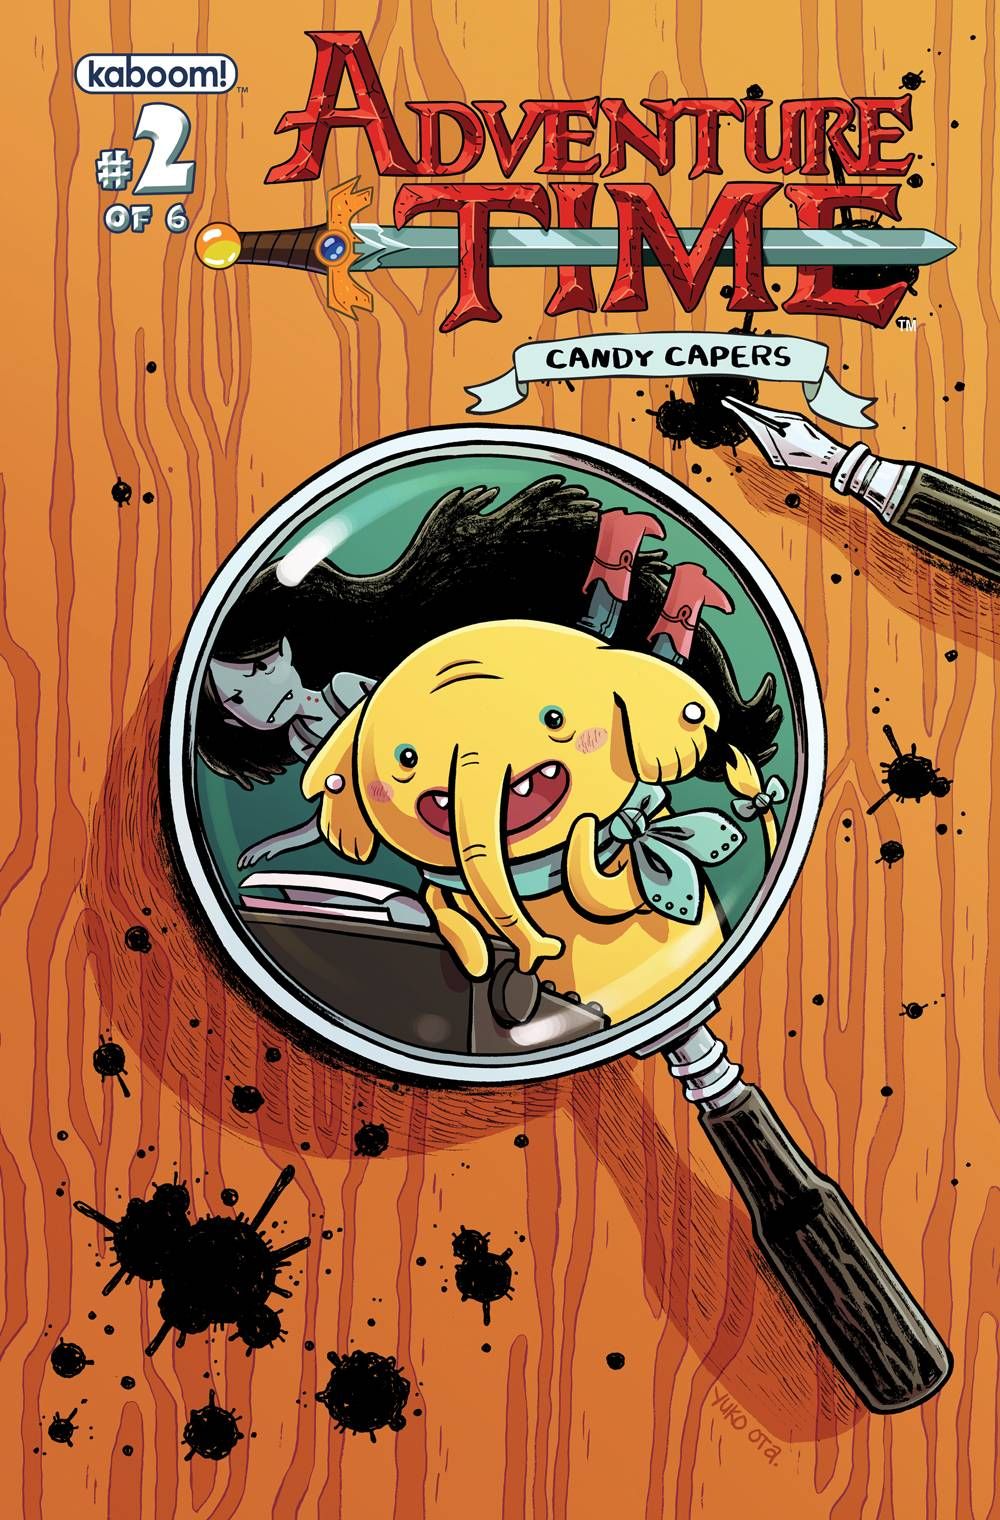 Adventure Time: Candy Capers #2 Comic